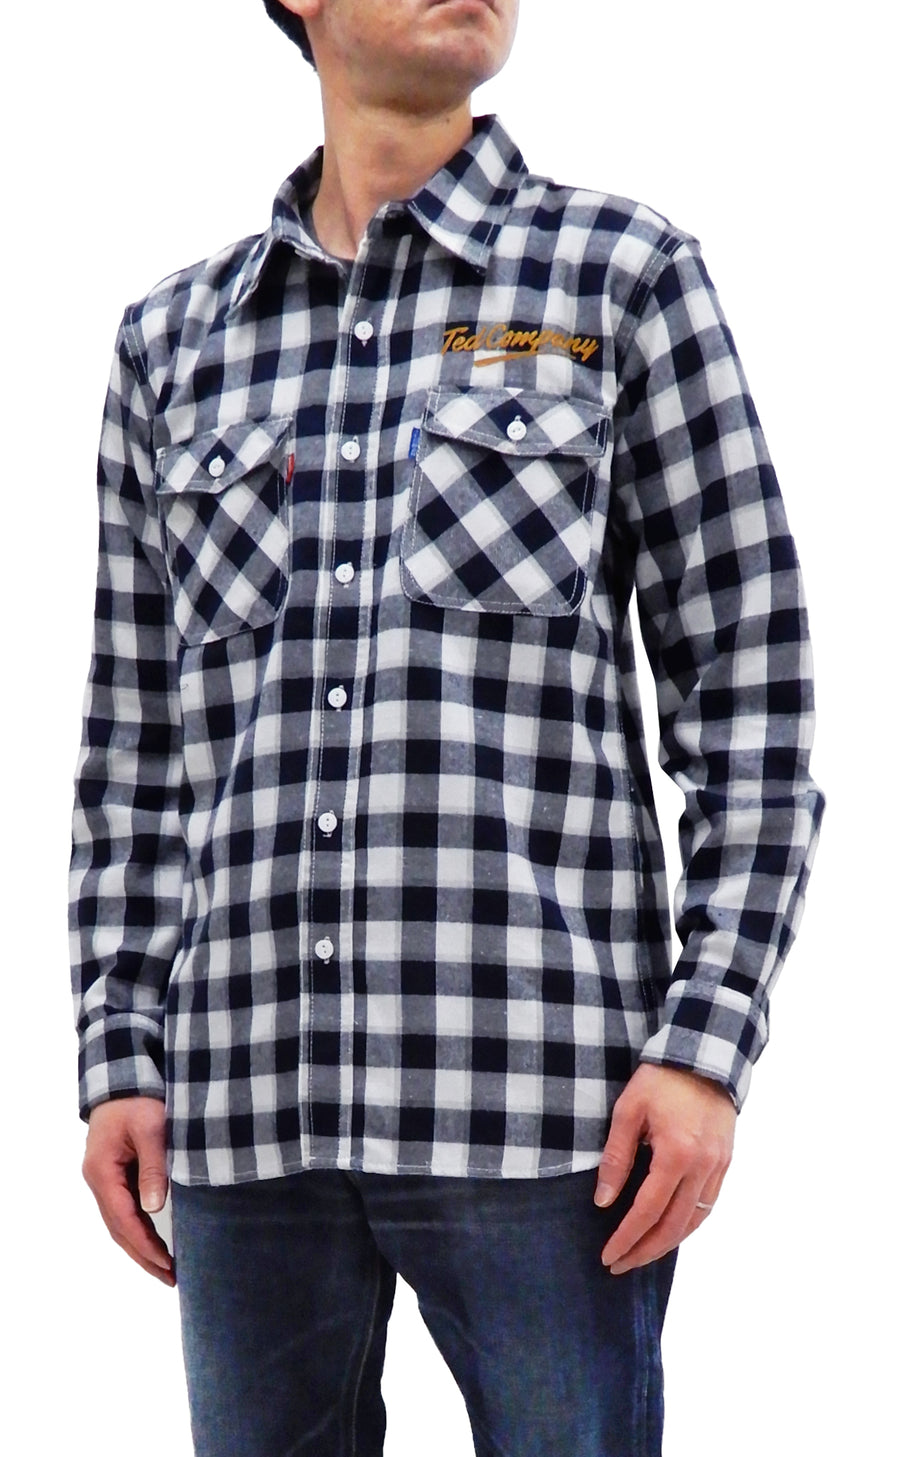 Men's Flannel Shirt  Handcrafted USA - The Vermont Flannel Co.